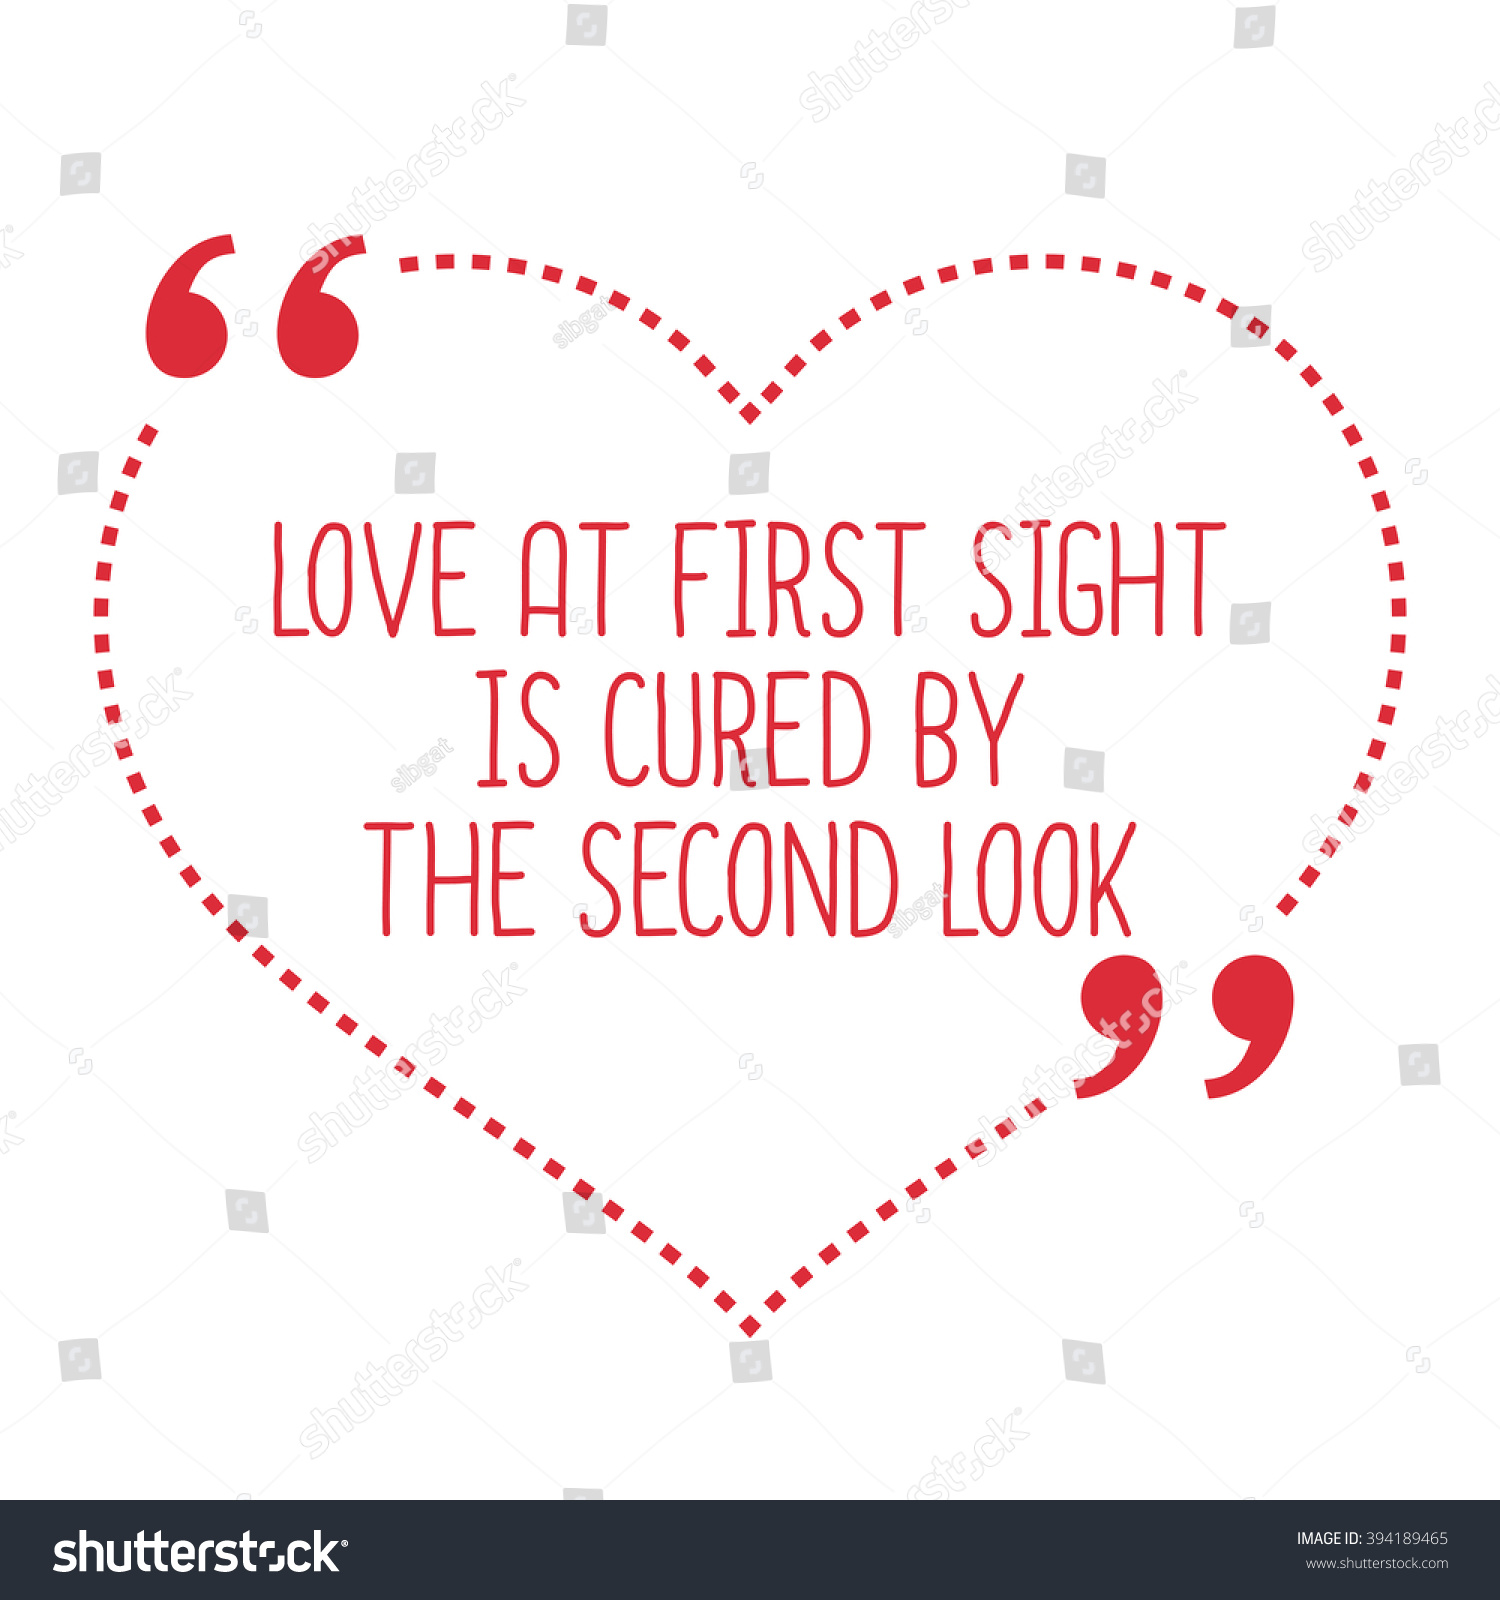 Funny Love Quote Love First Sight Stock Vector Stock Vector Funny Love Quote Love At First Sight Is Cured By The Second Look Simple Trendy Design